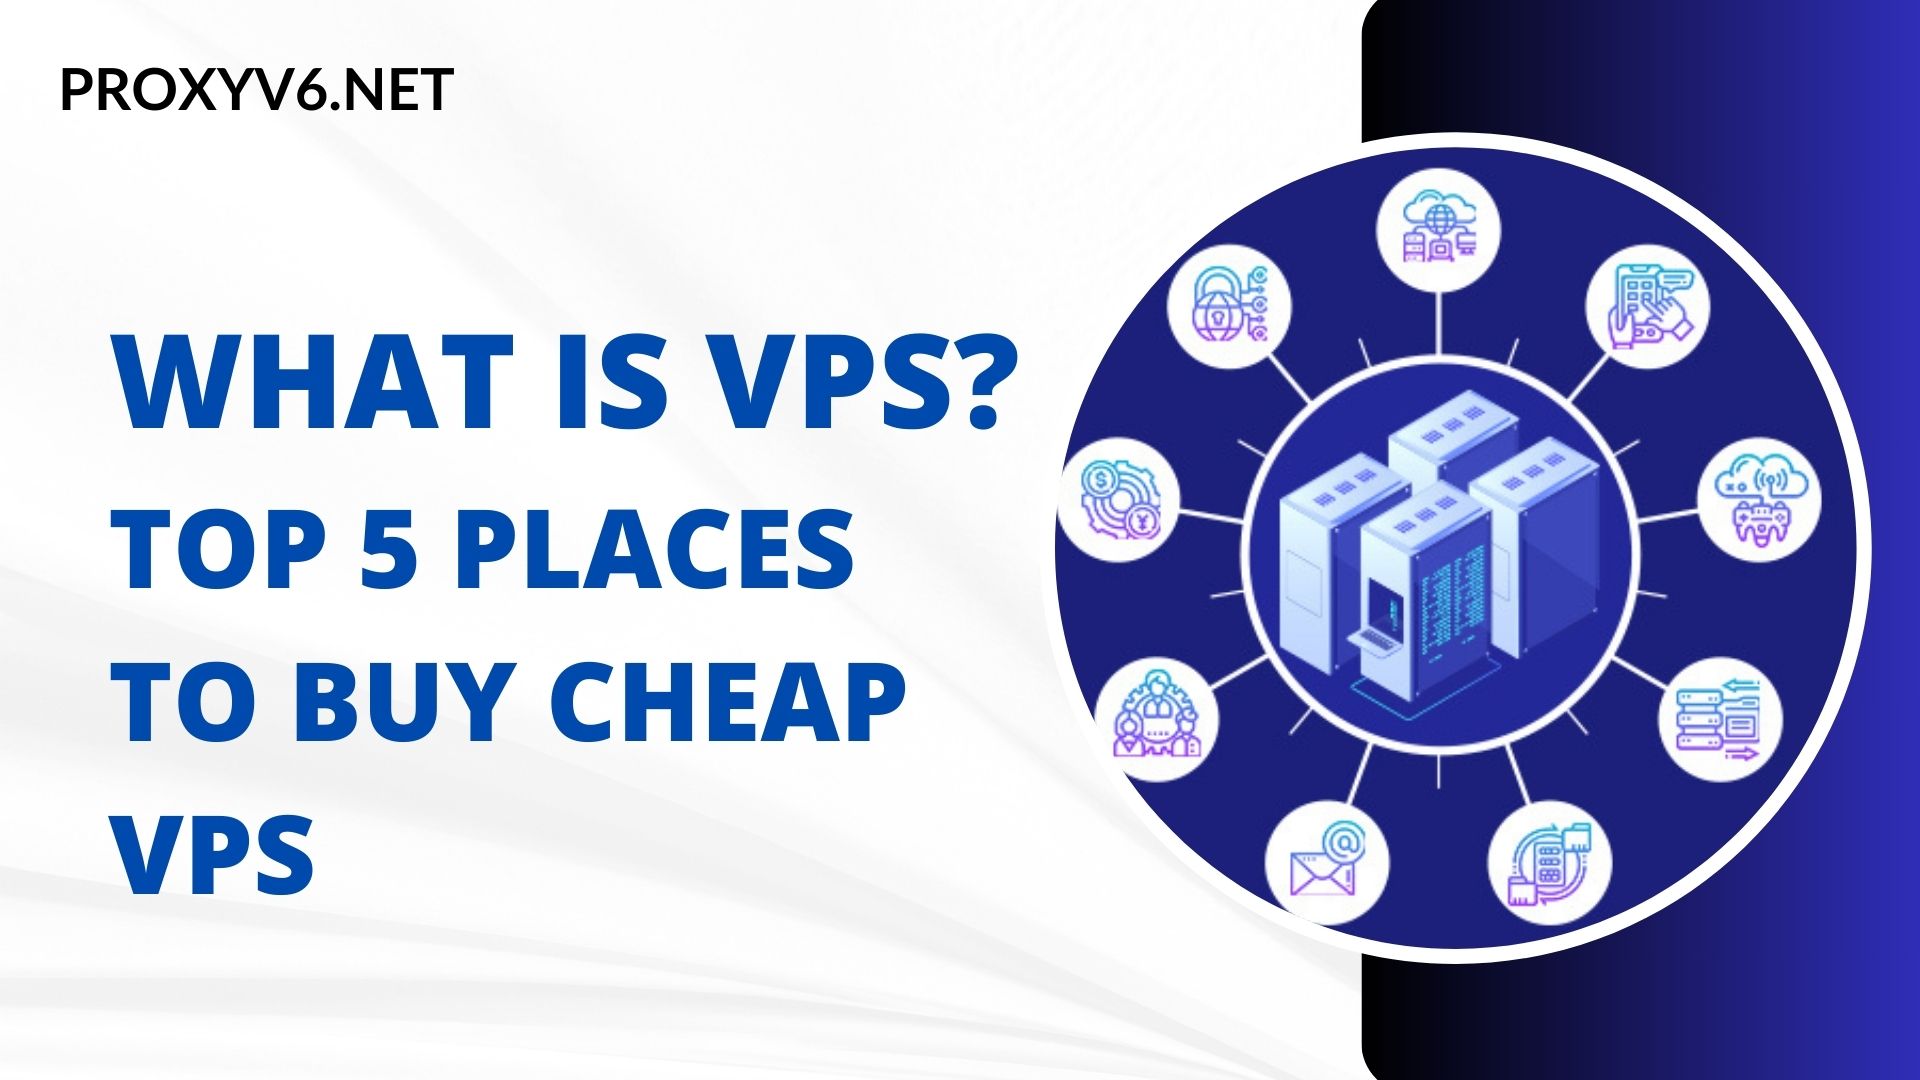 What is VPS? Top 5 places to buy cheap VPS